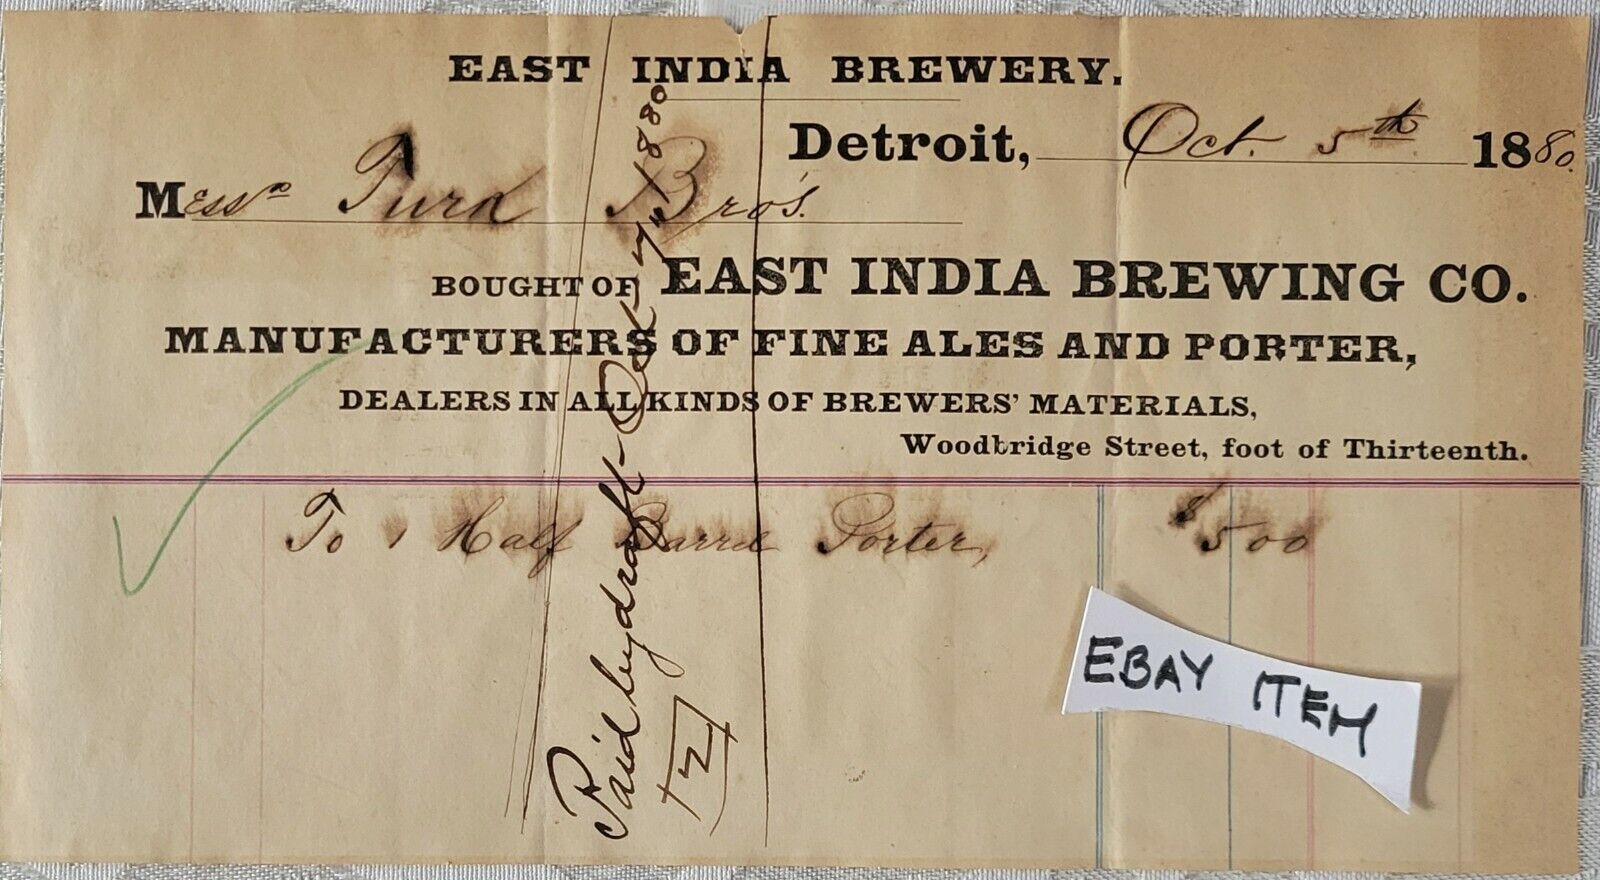 1881 EAST INDIA BREWING CO Detroit Michigan BHD beer BREWERY Ale Porter PRE PRO